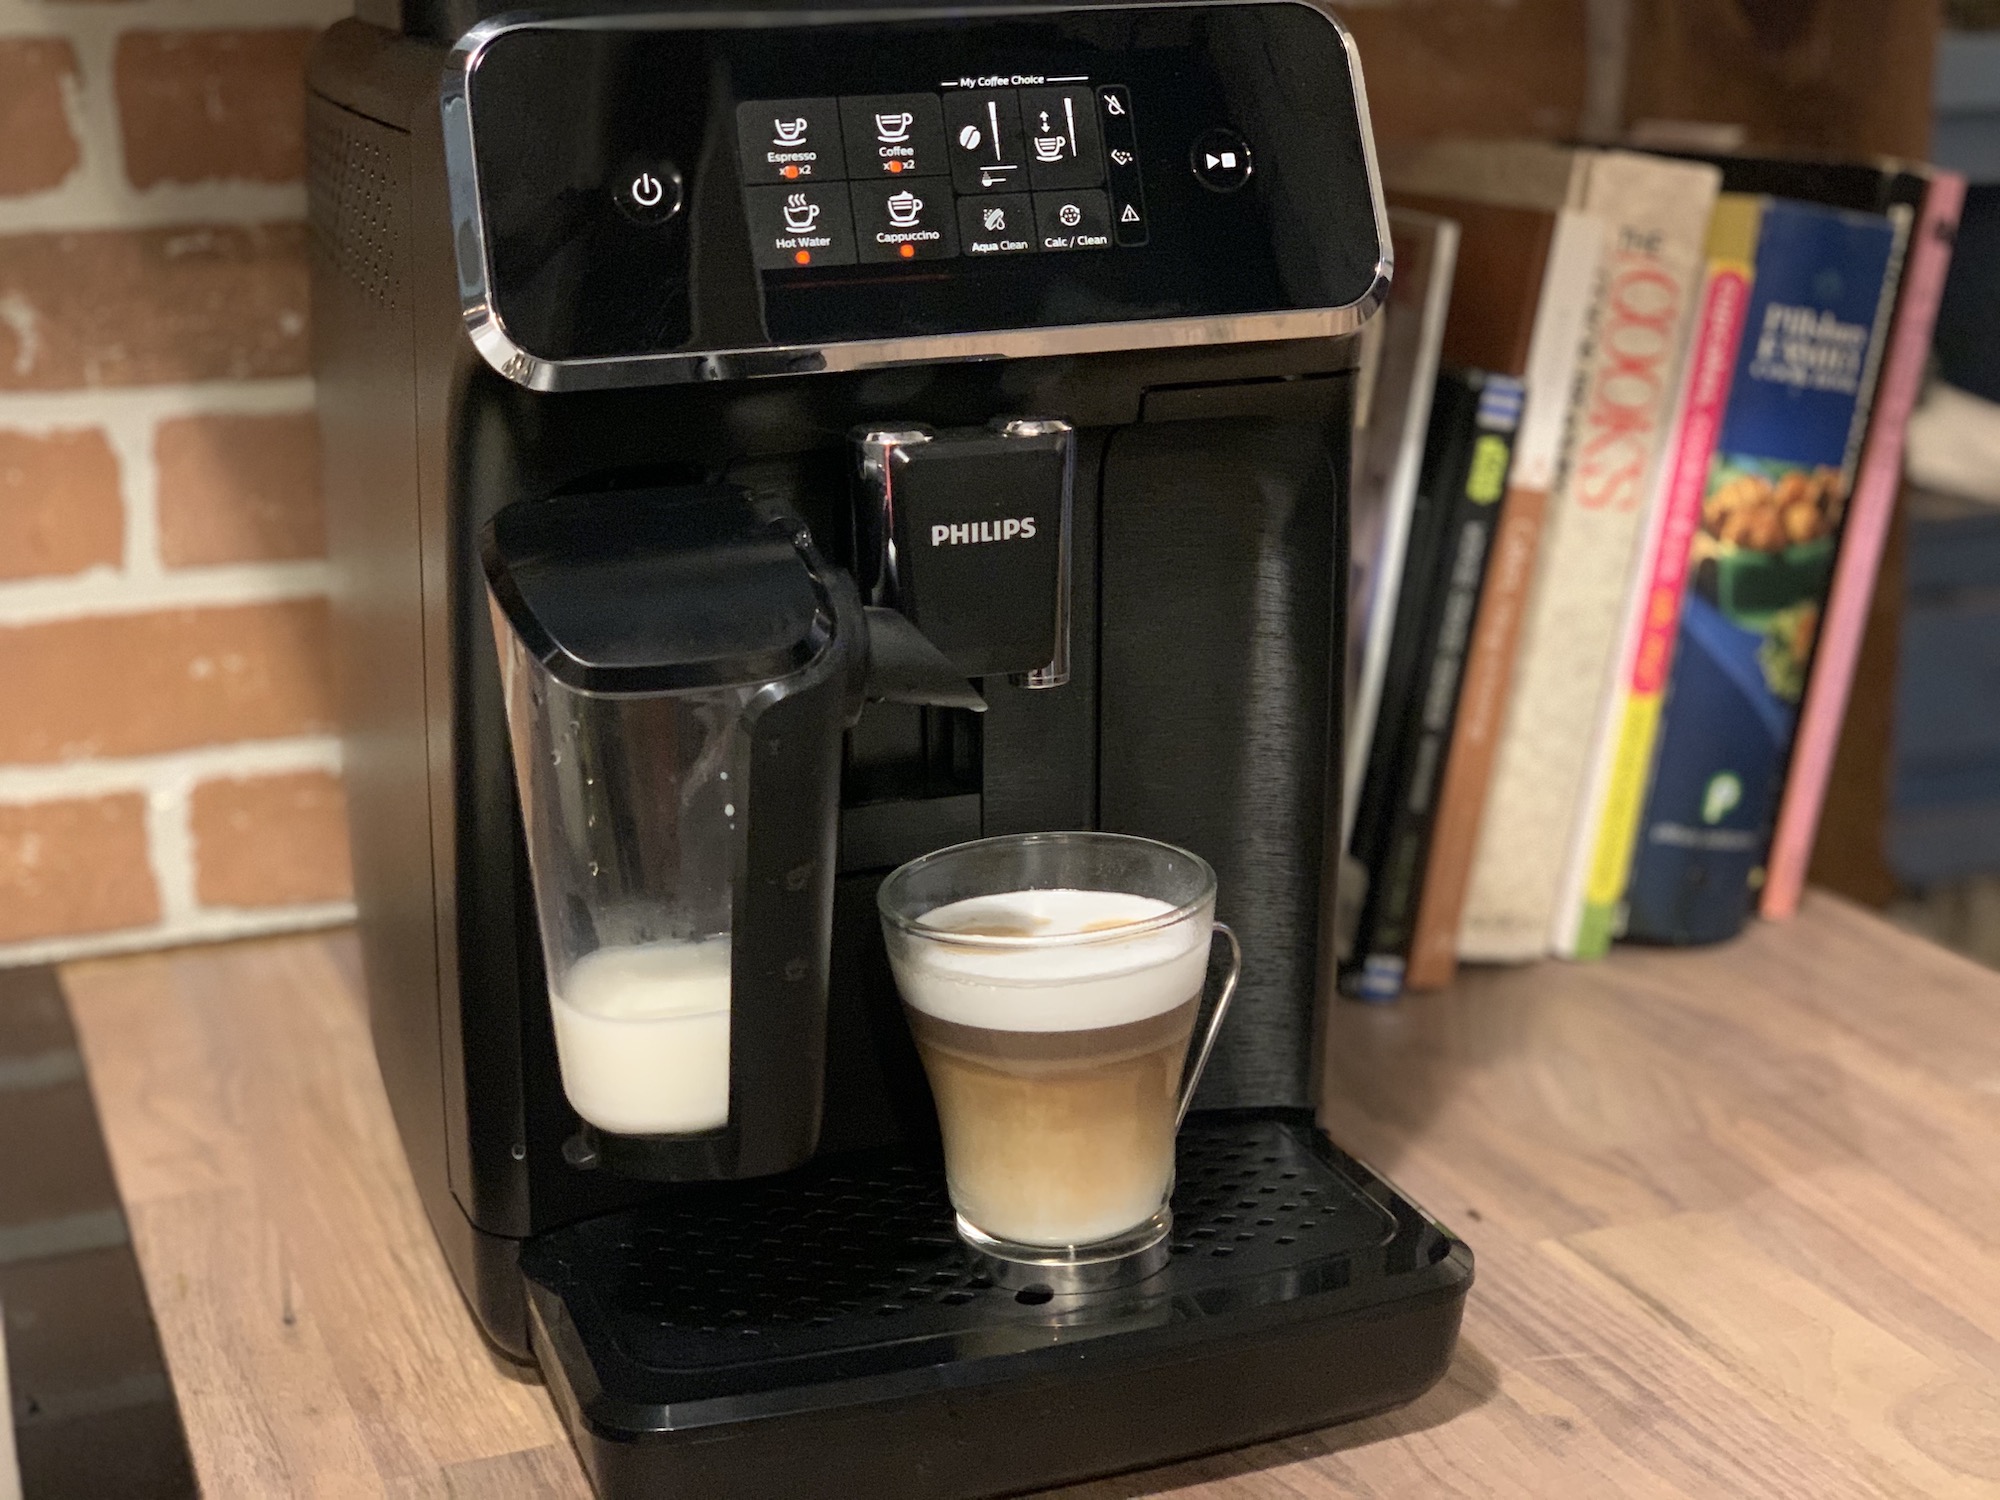 Philips 2200 automatic espresso machine with LatteGo milk frother